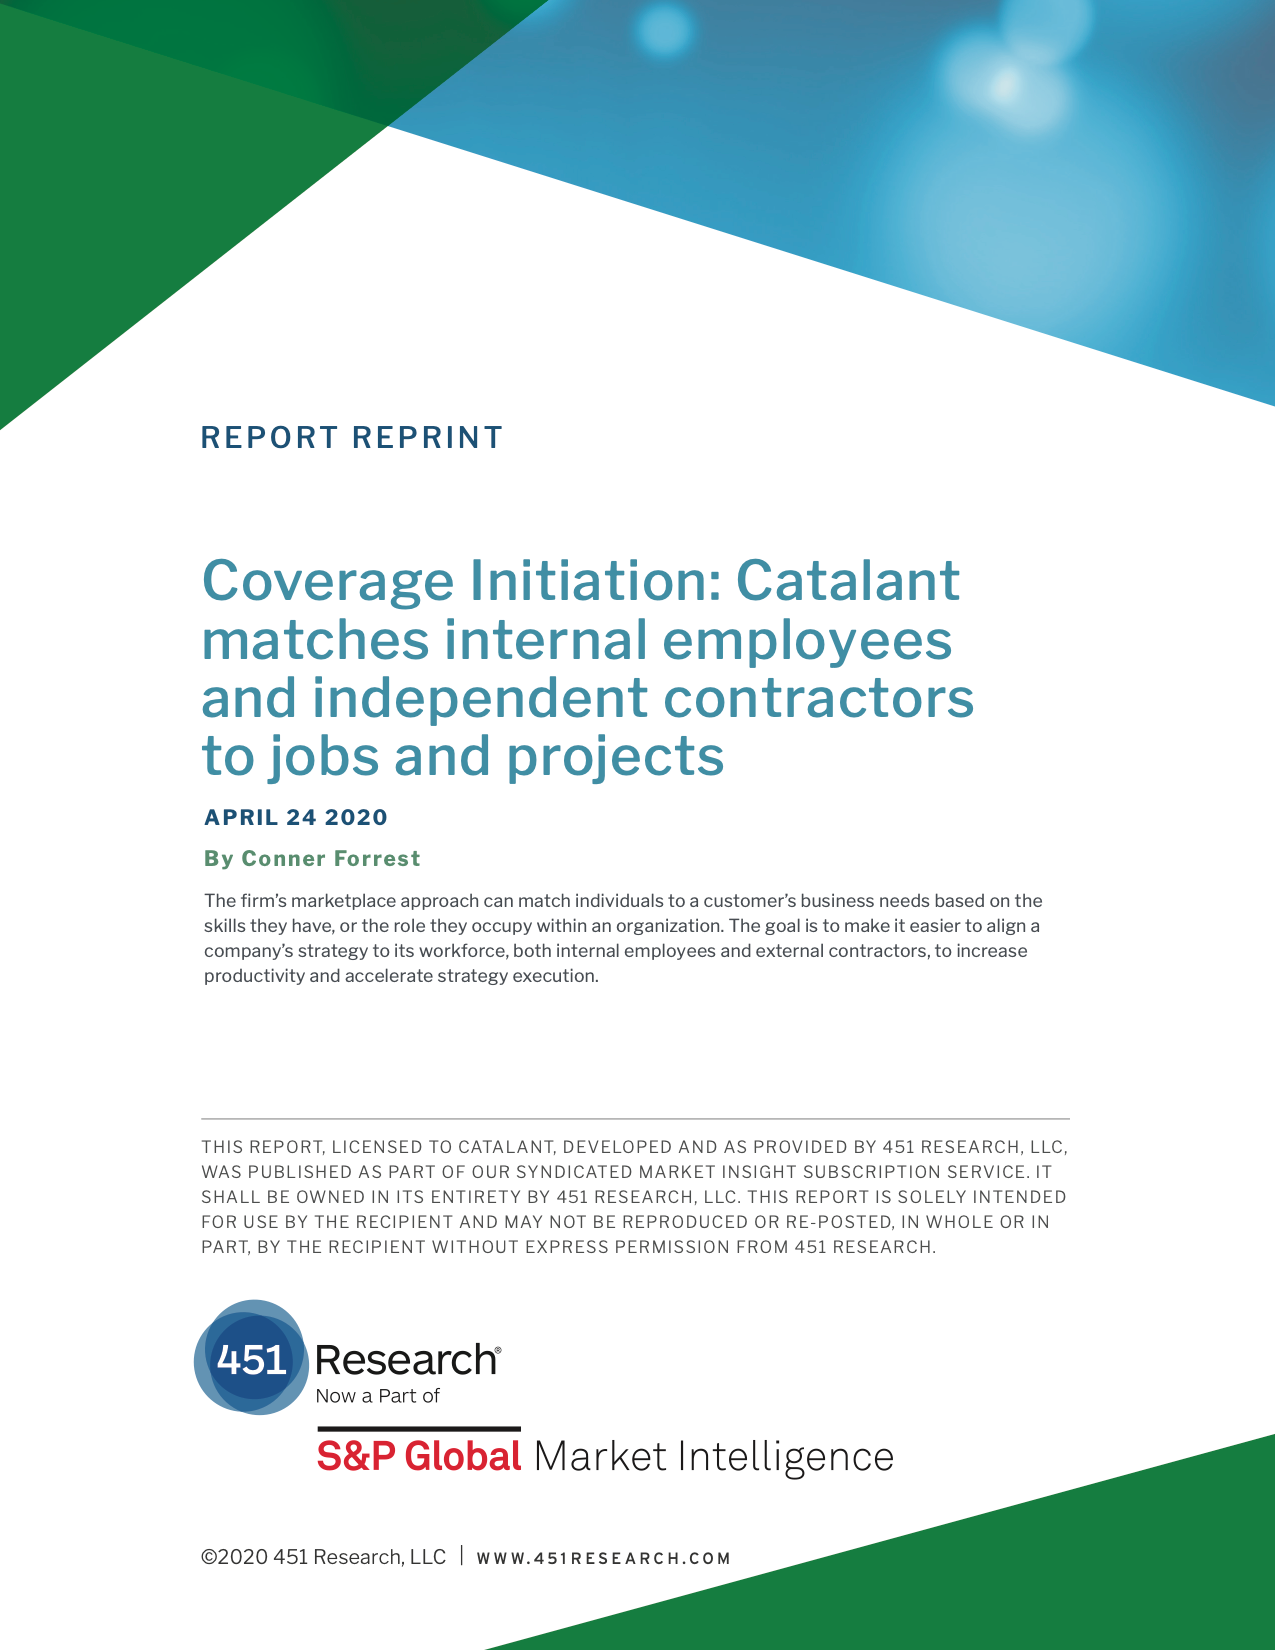 Report Reprint: Coverage Initiation: Catalant matches internal employees and independent contractors to jobs and projects by Conner Forrest